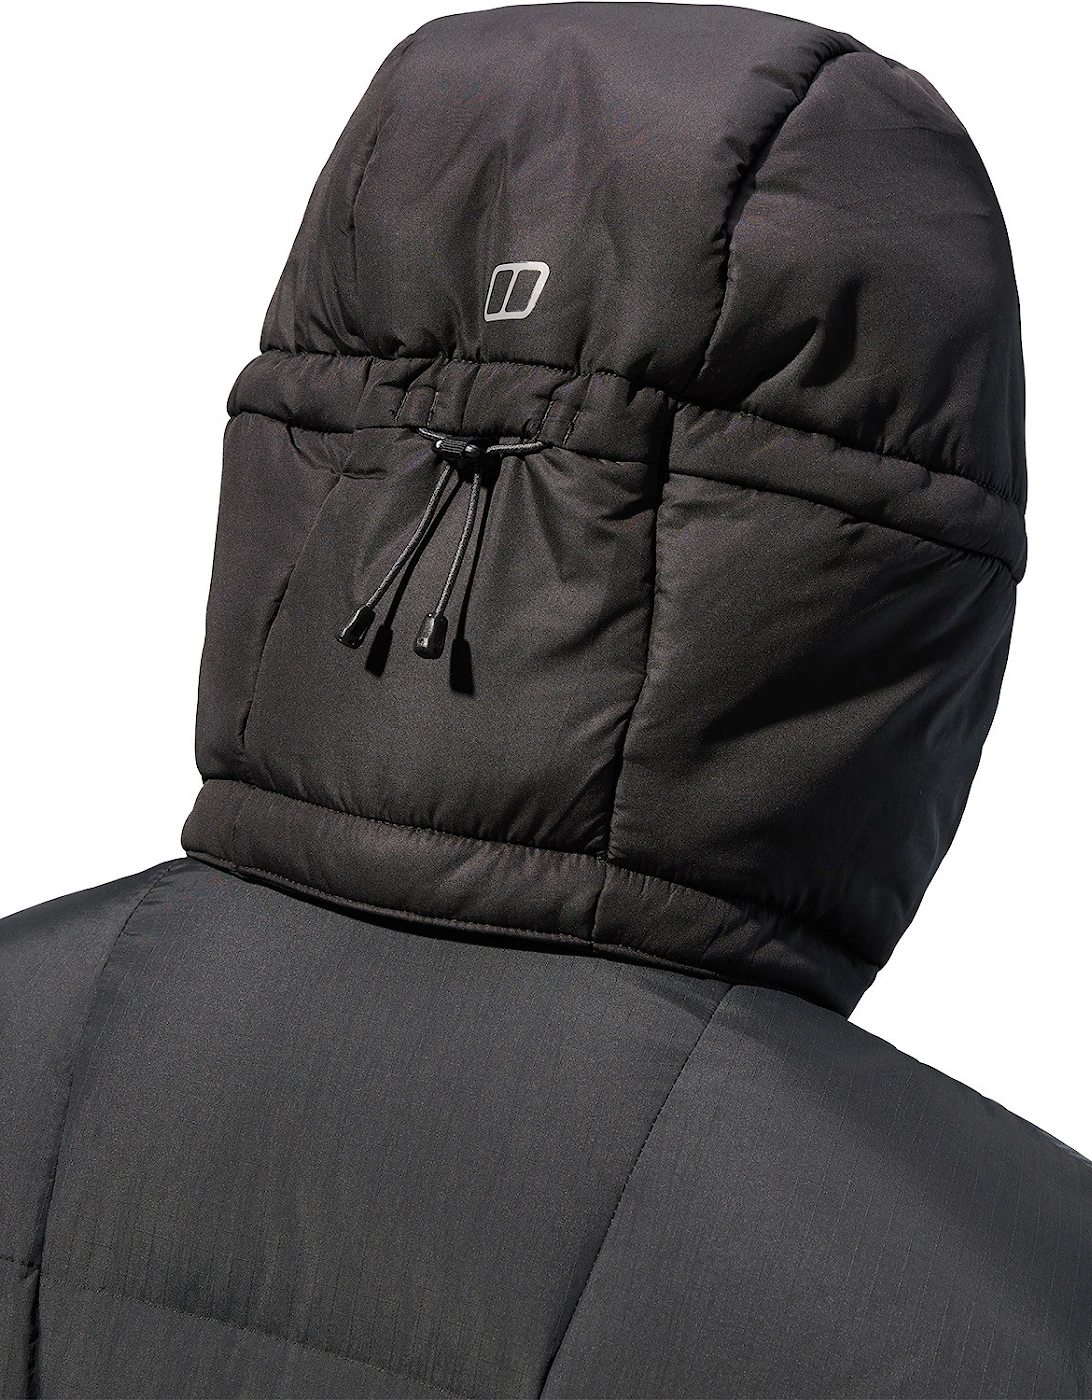 Mens Down Insulated Long Jacket (Black)